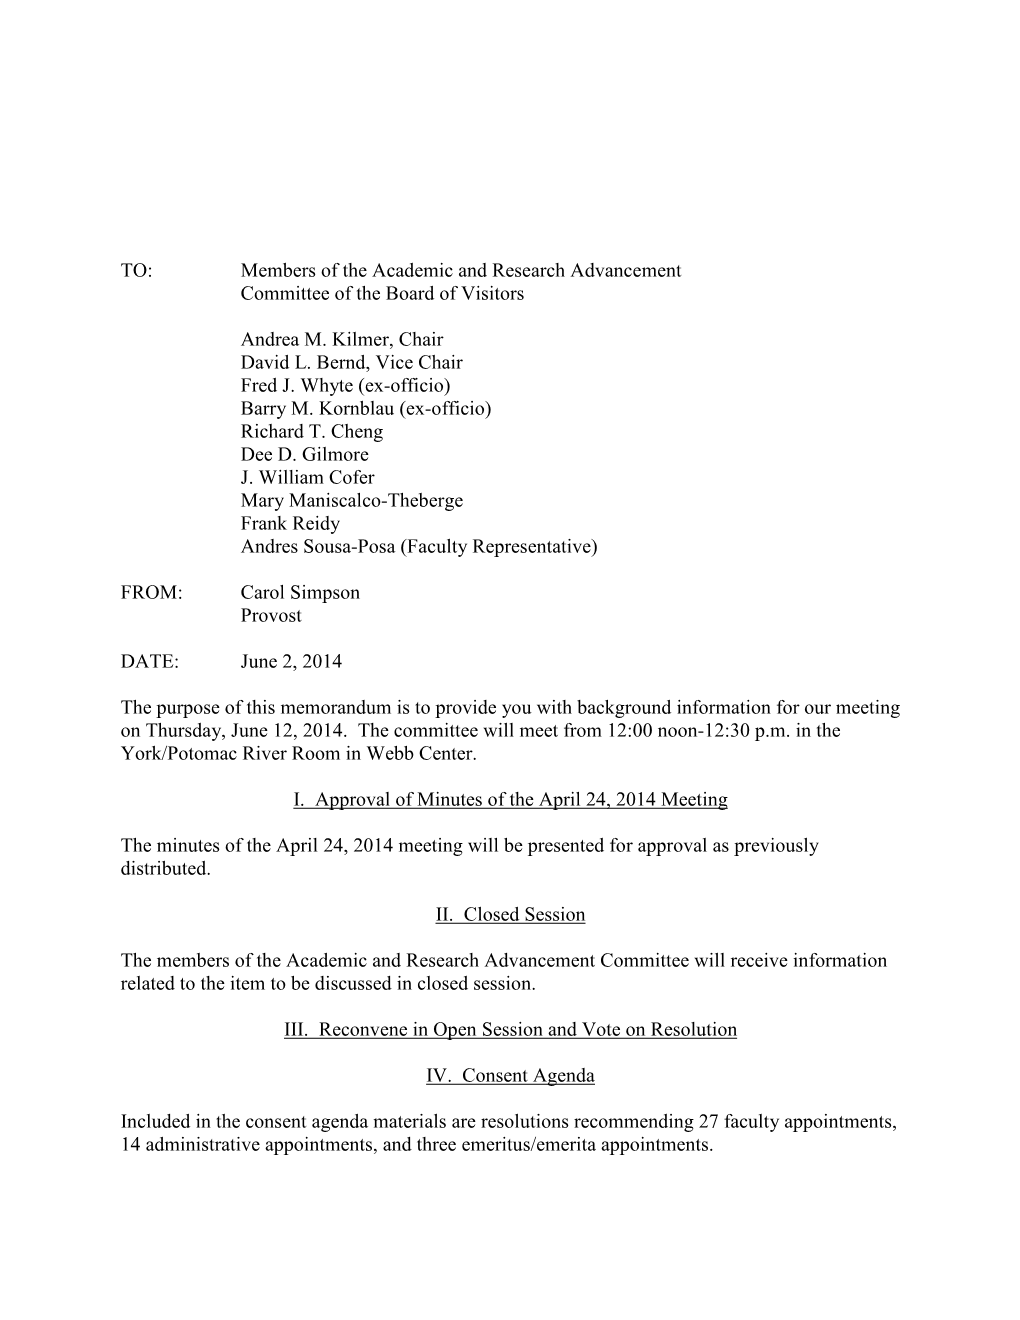 Academic & Research Advancement Committee Agenda